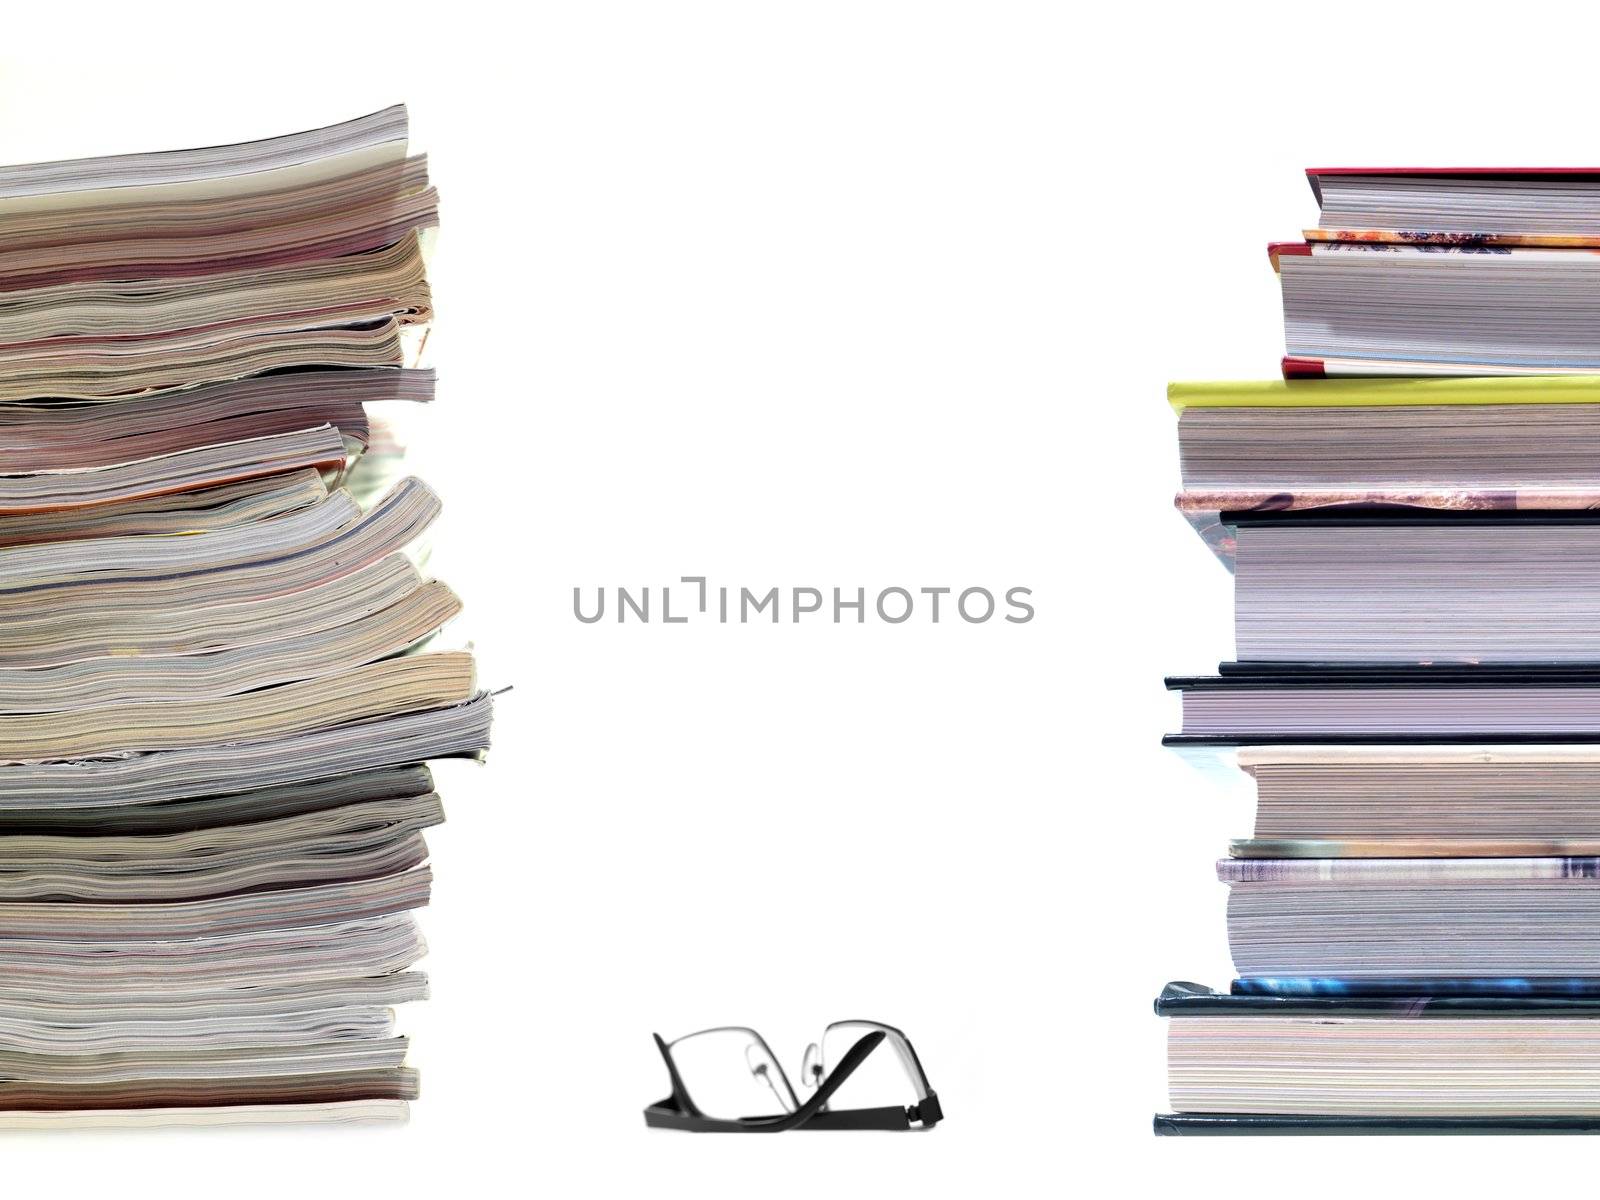 A book stack isolated against a white background